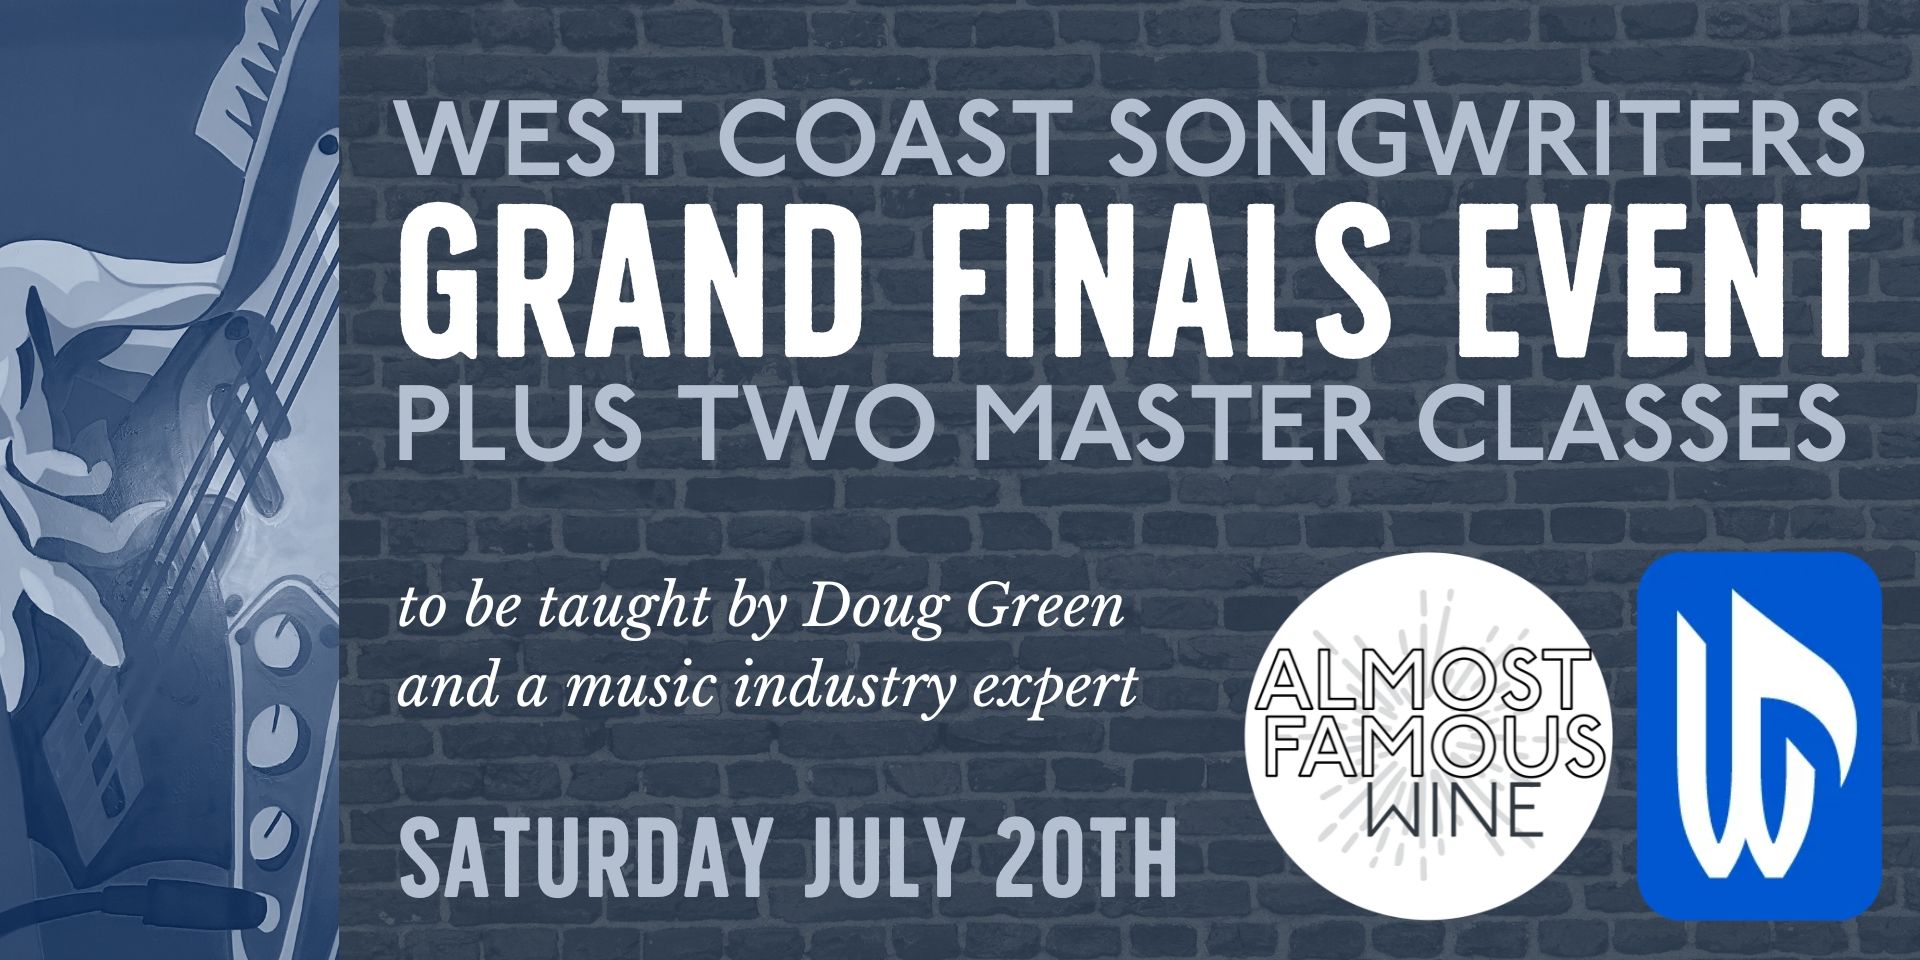 West Coast Songwriters Grand Finals & Masterclass Experience promotional image